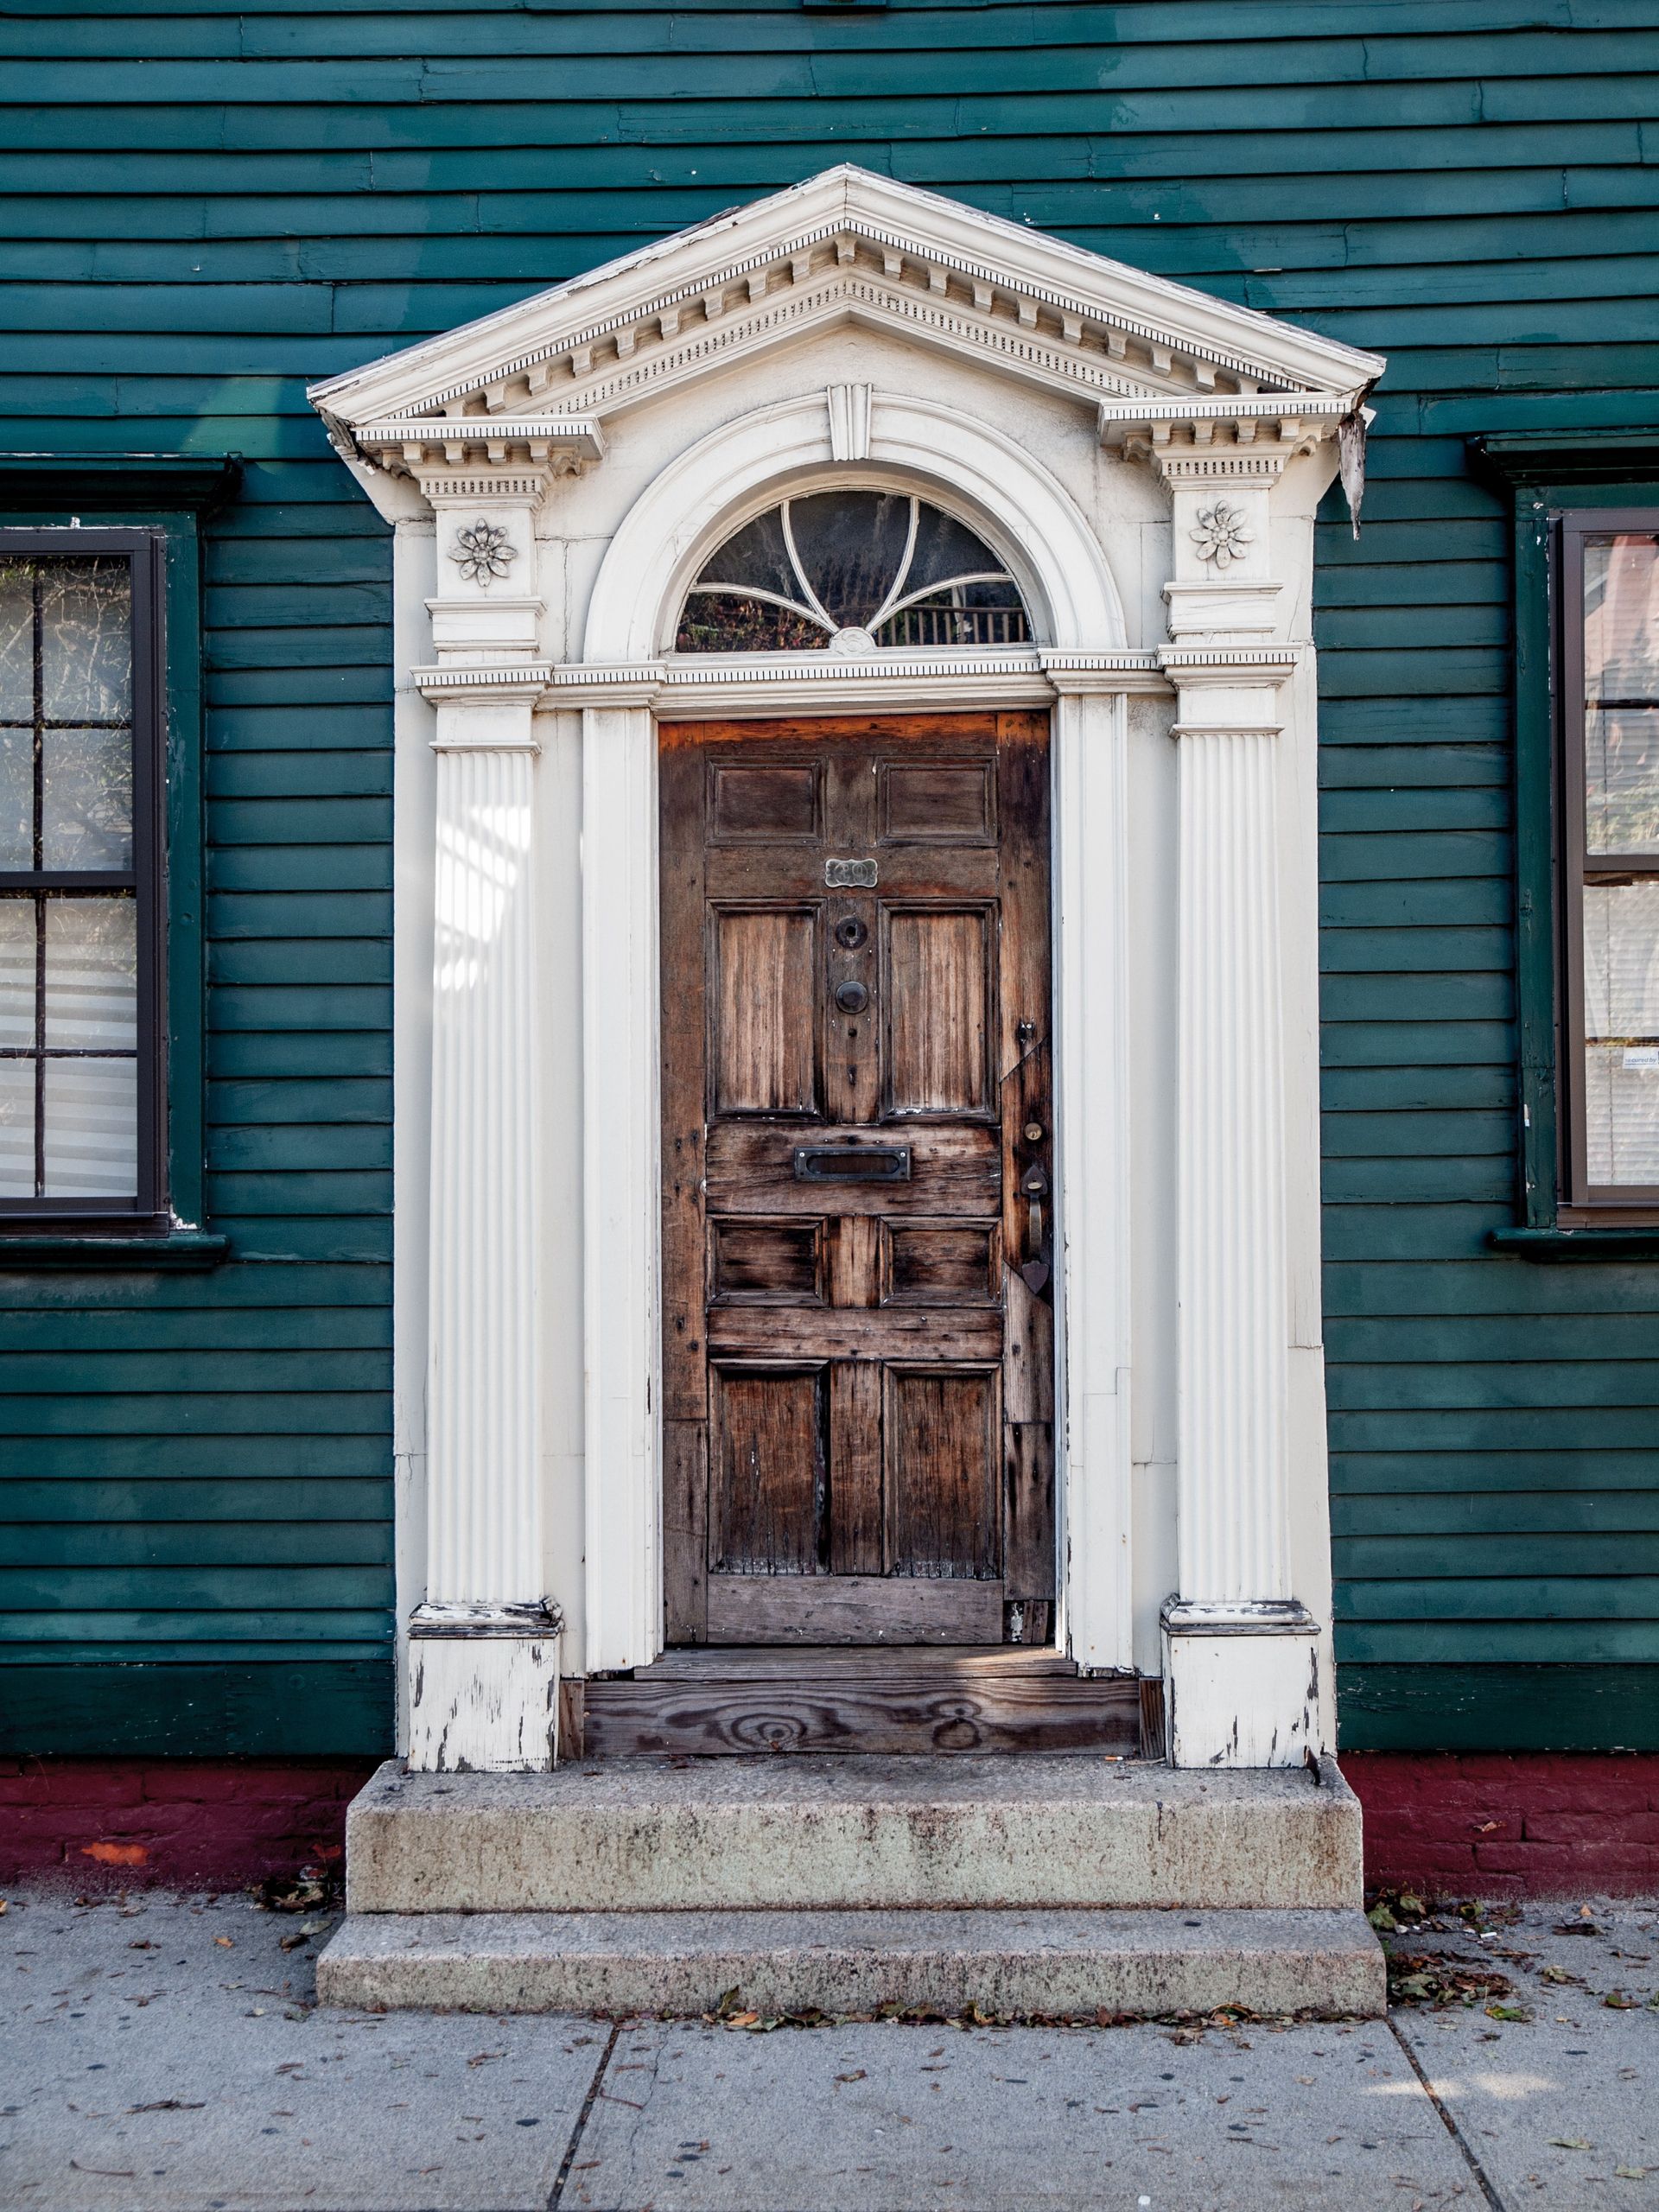 An old wooden door on a teal-colored house.